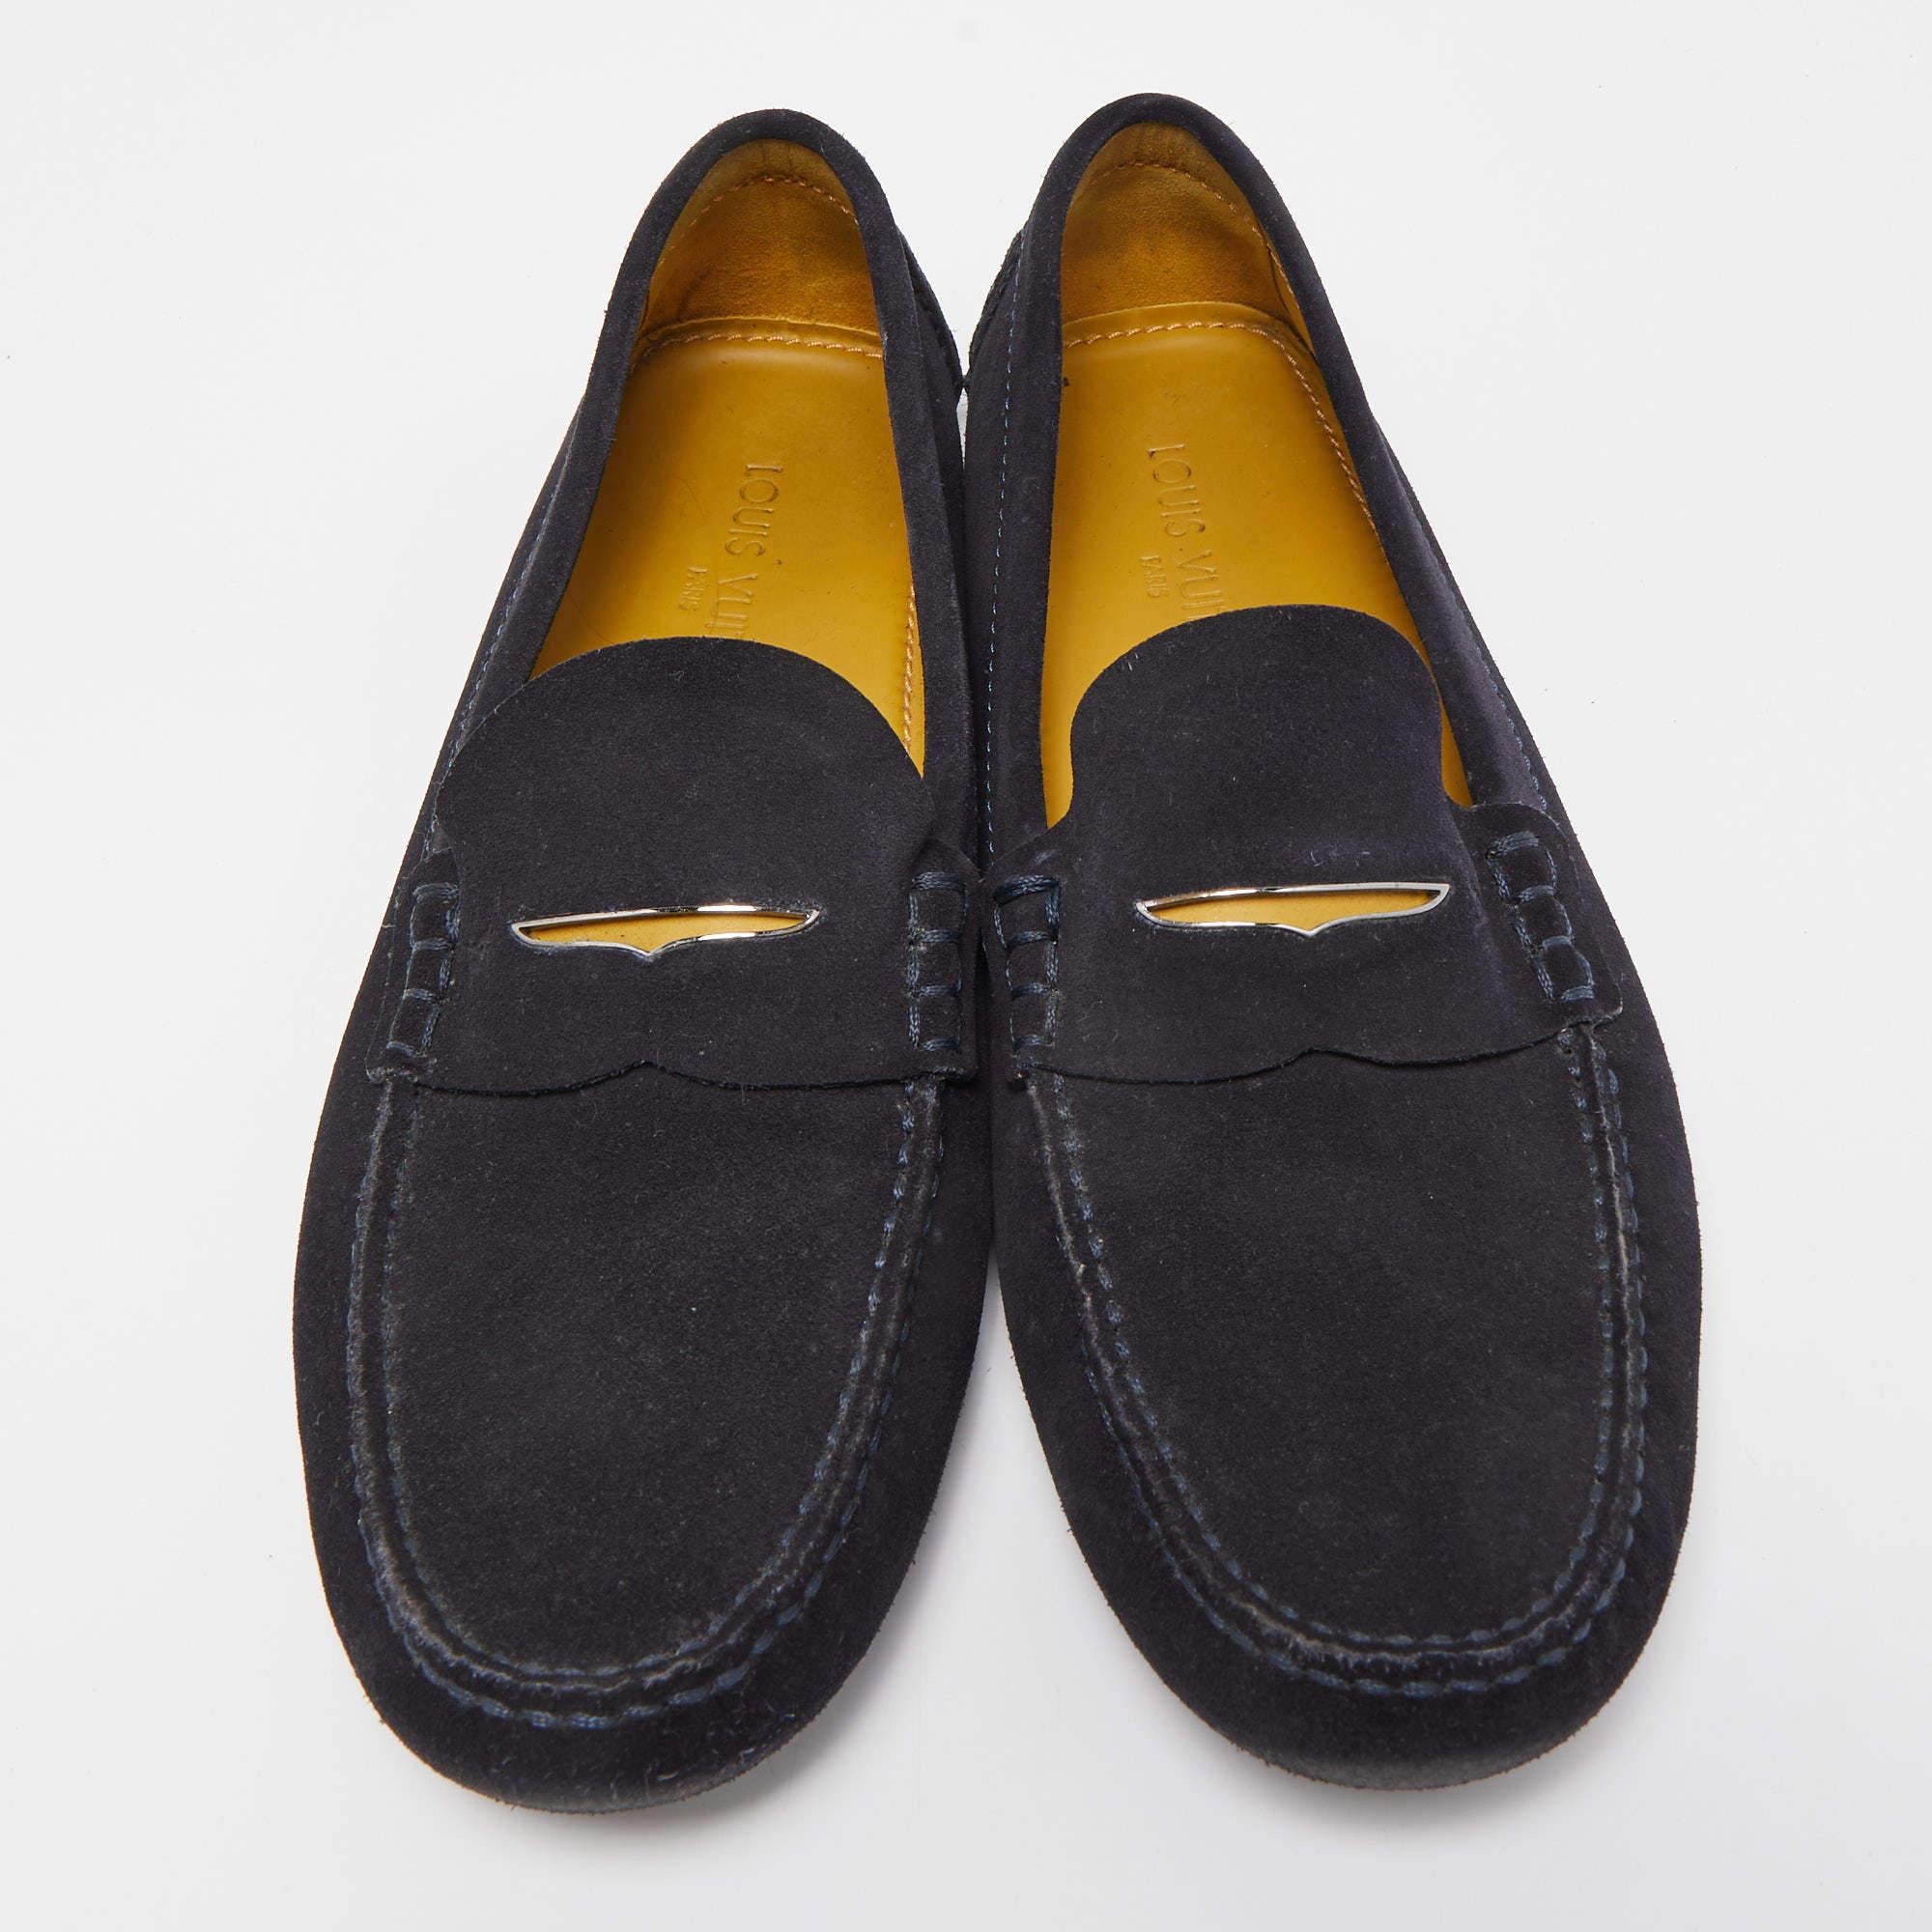 Practical, fashionable, and durable—these designer loafers are carefully built to be fine companions to your everyday style. They come made using the best materials to be a prized buy.

Includes: Original Dustbag

 